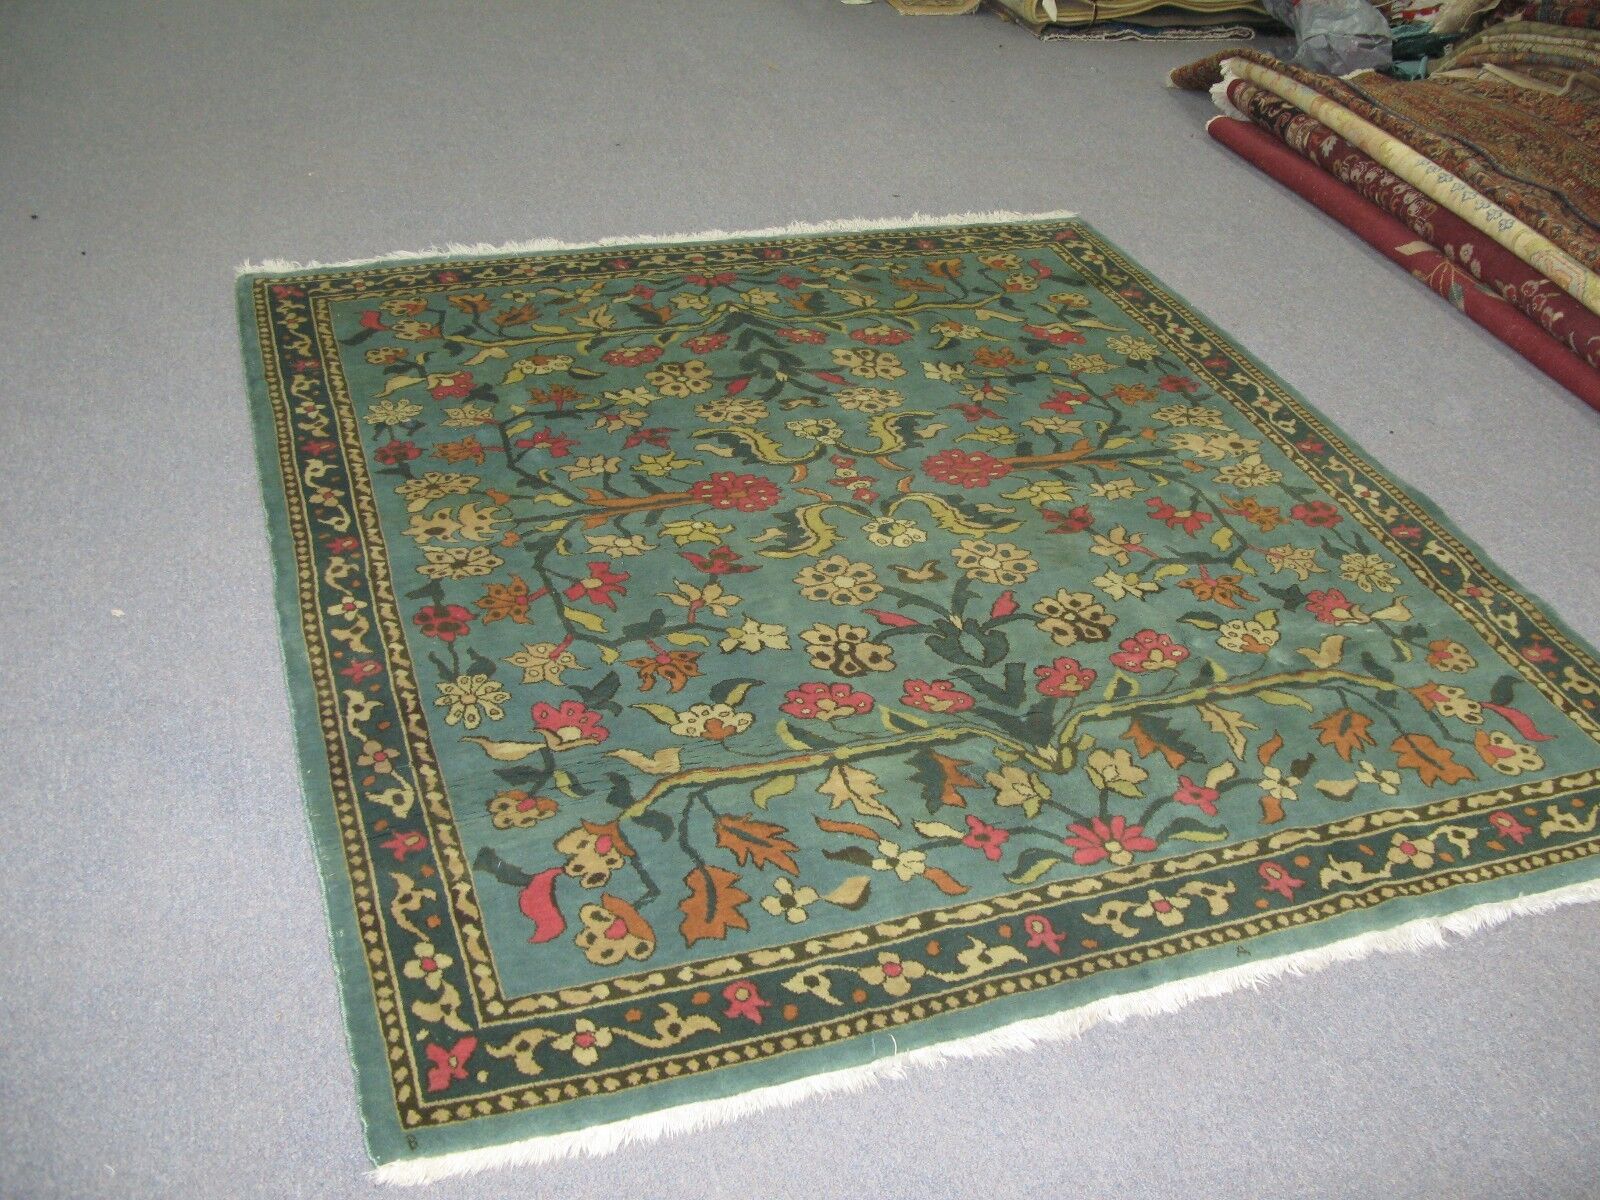 1940's  FLORAL ARTS & CRAFTS EUROPEAN HAND KNOTTED WOOL  RUG/CARPET 5'-4 X 6'-2